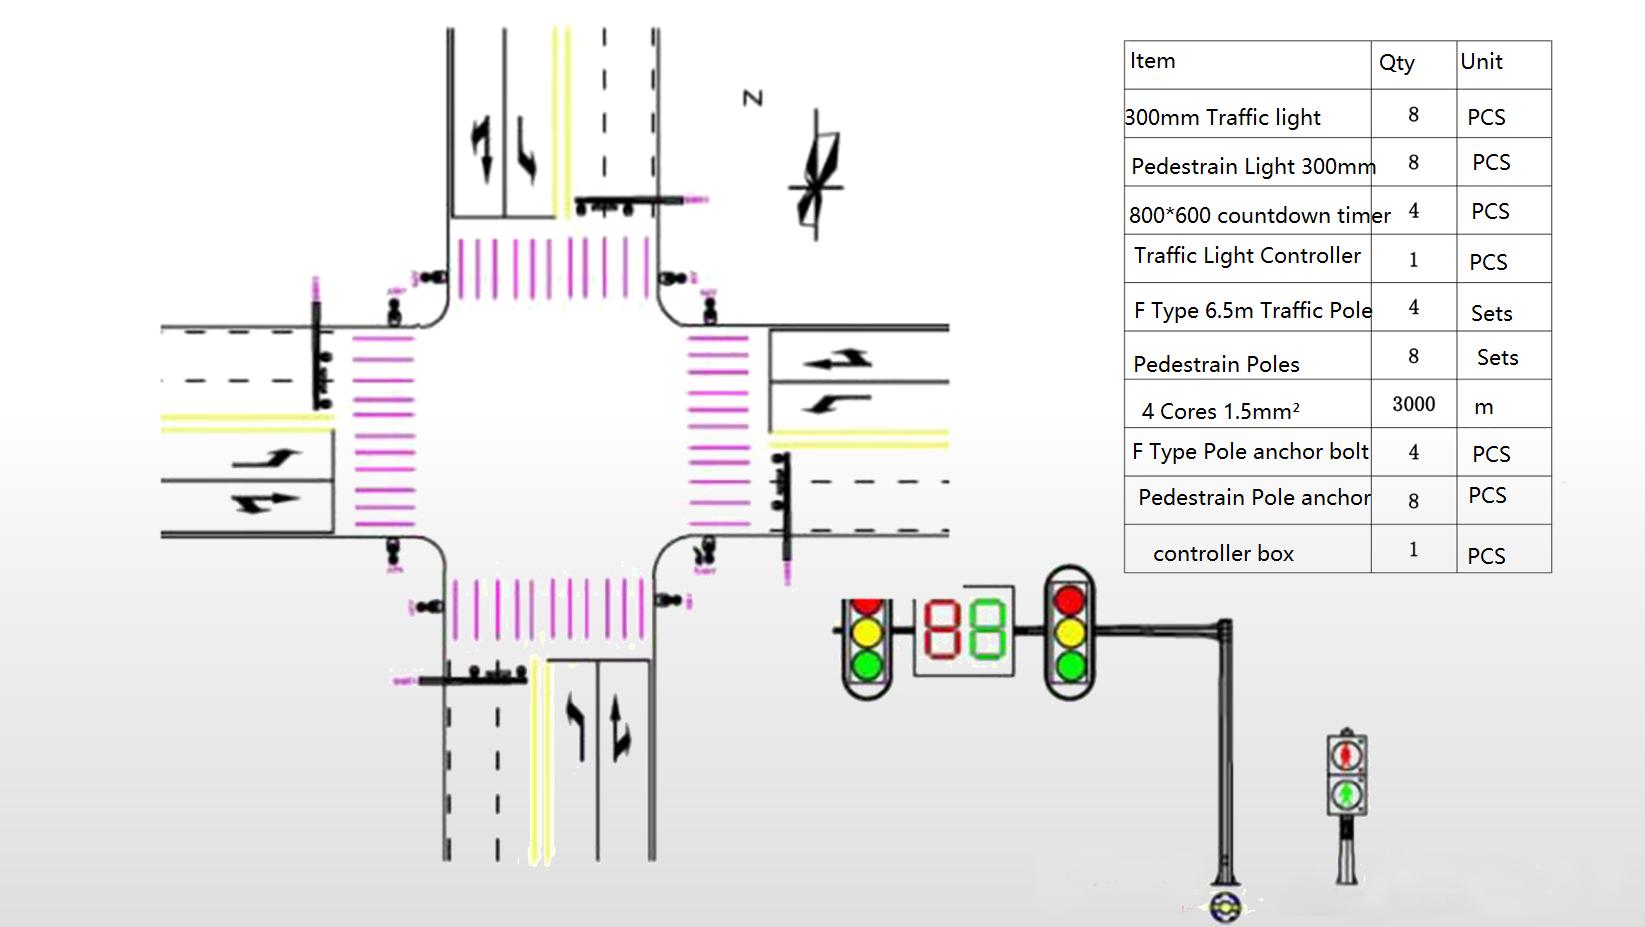 Traffic Light Configuration Scheme For Intersection